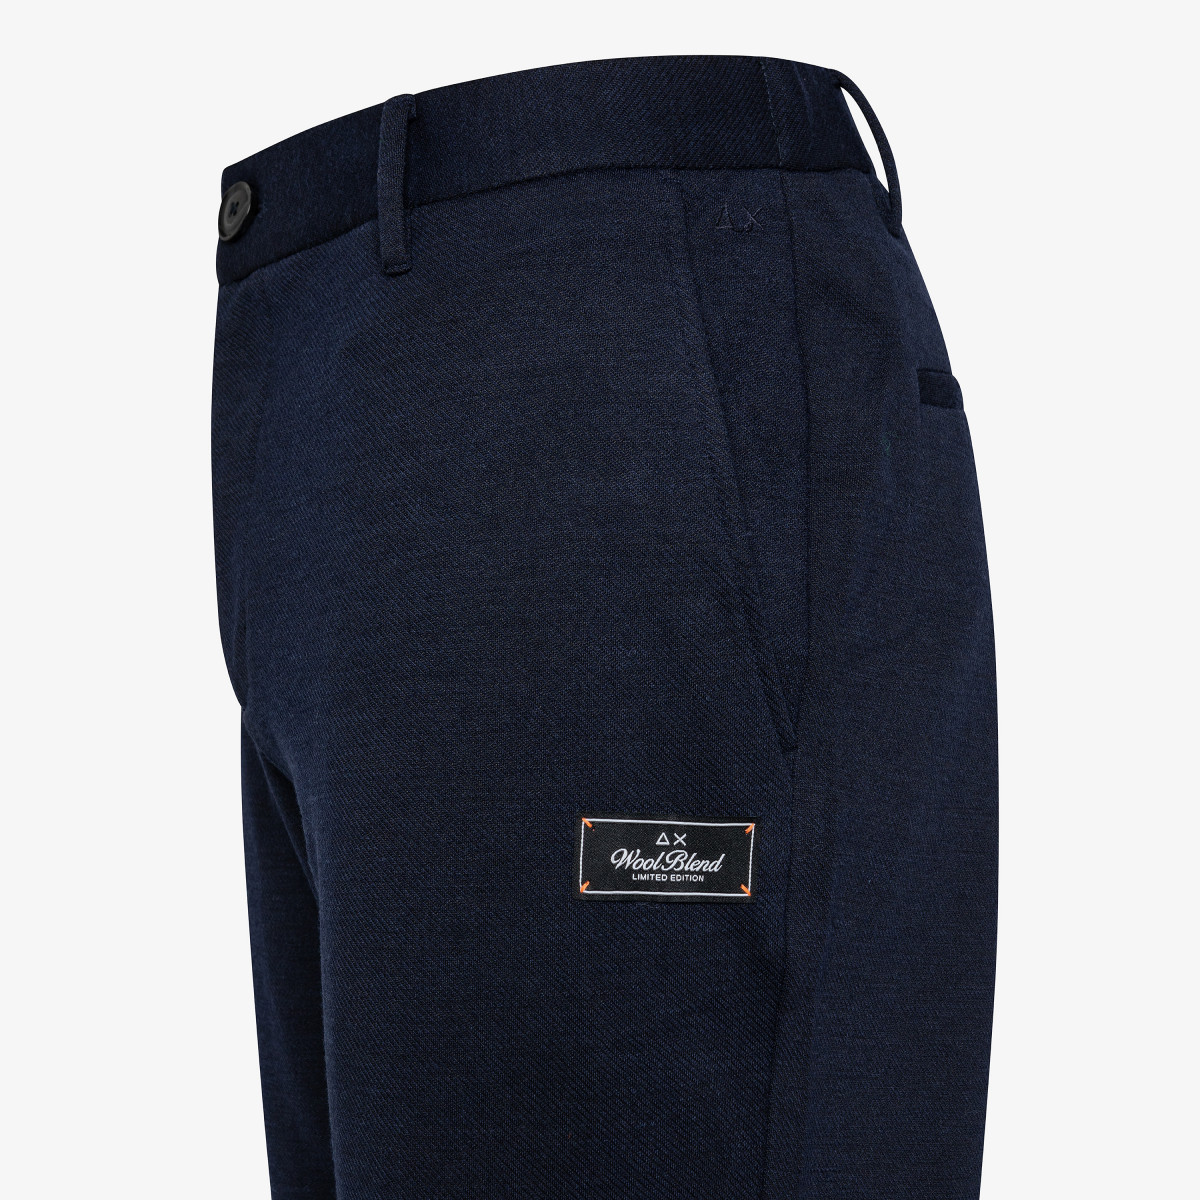 PANT COULISSE WOOL NAVY BLUE